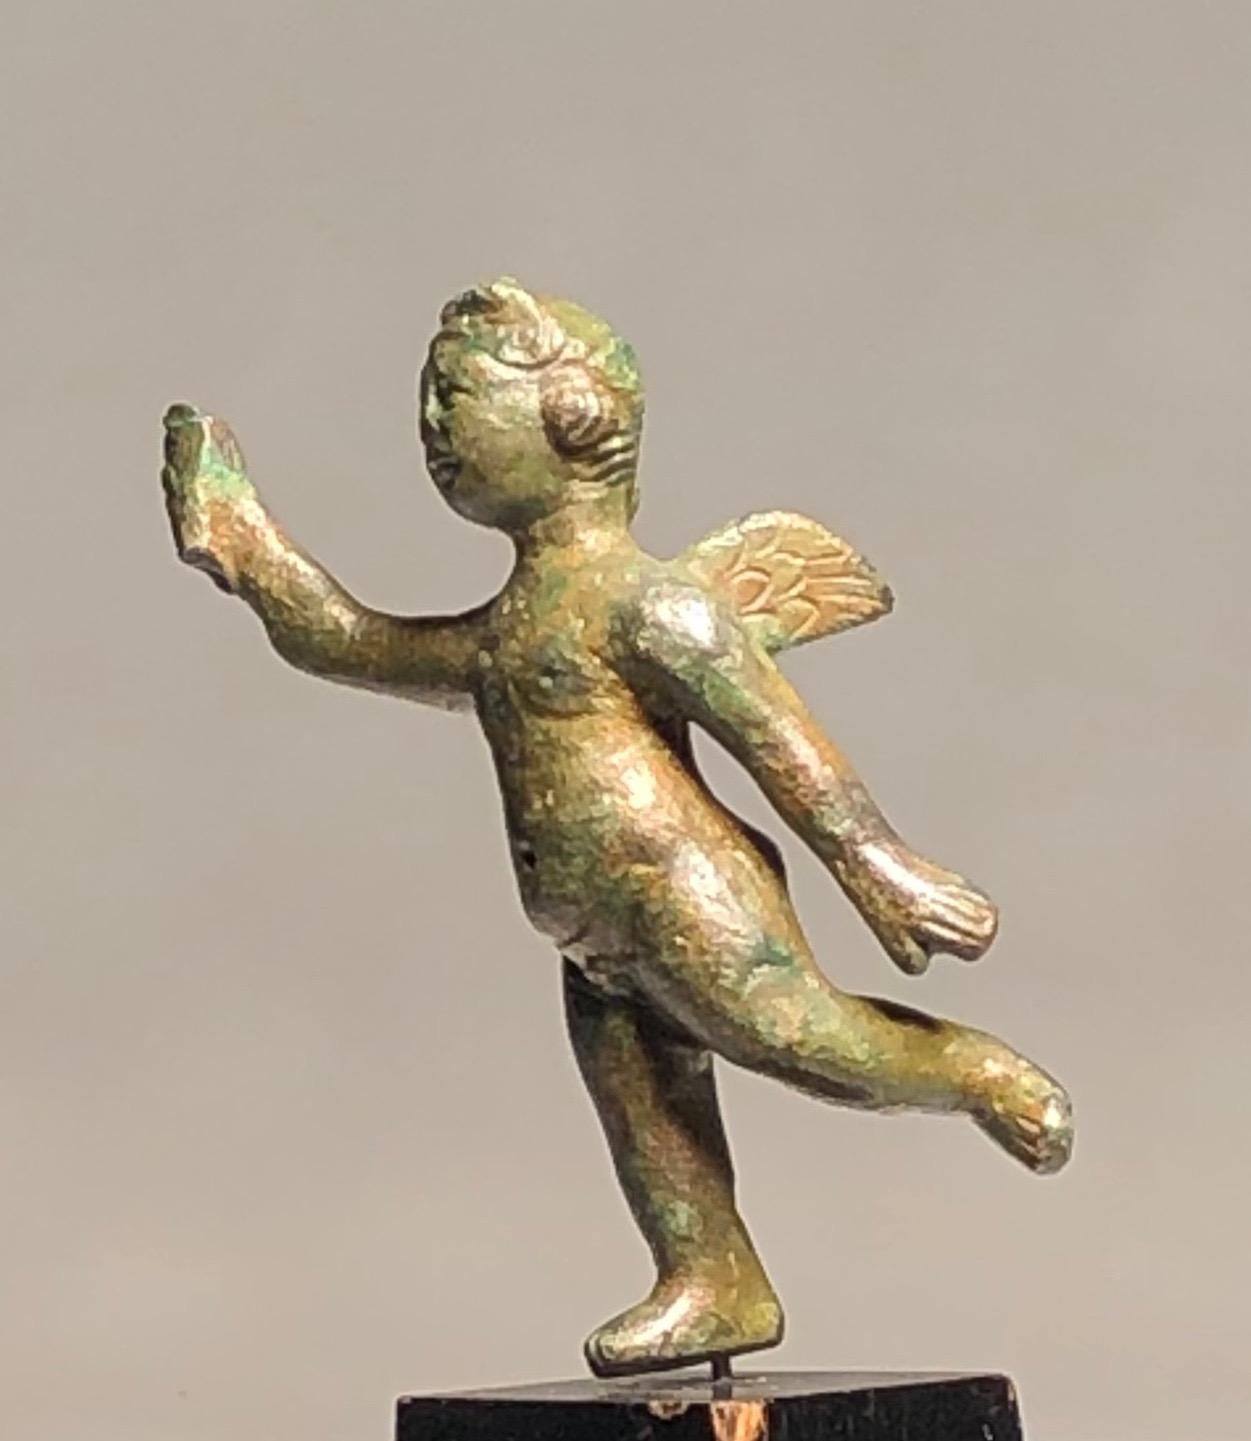 Classical Roman Roman Bronze Statuette of the Young God Eros ‘Cupid’